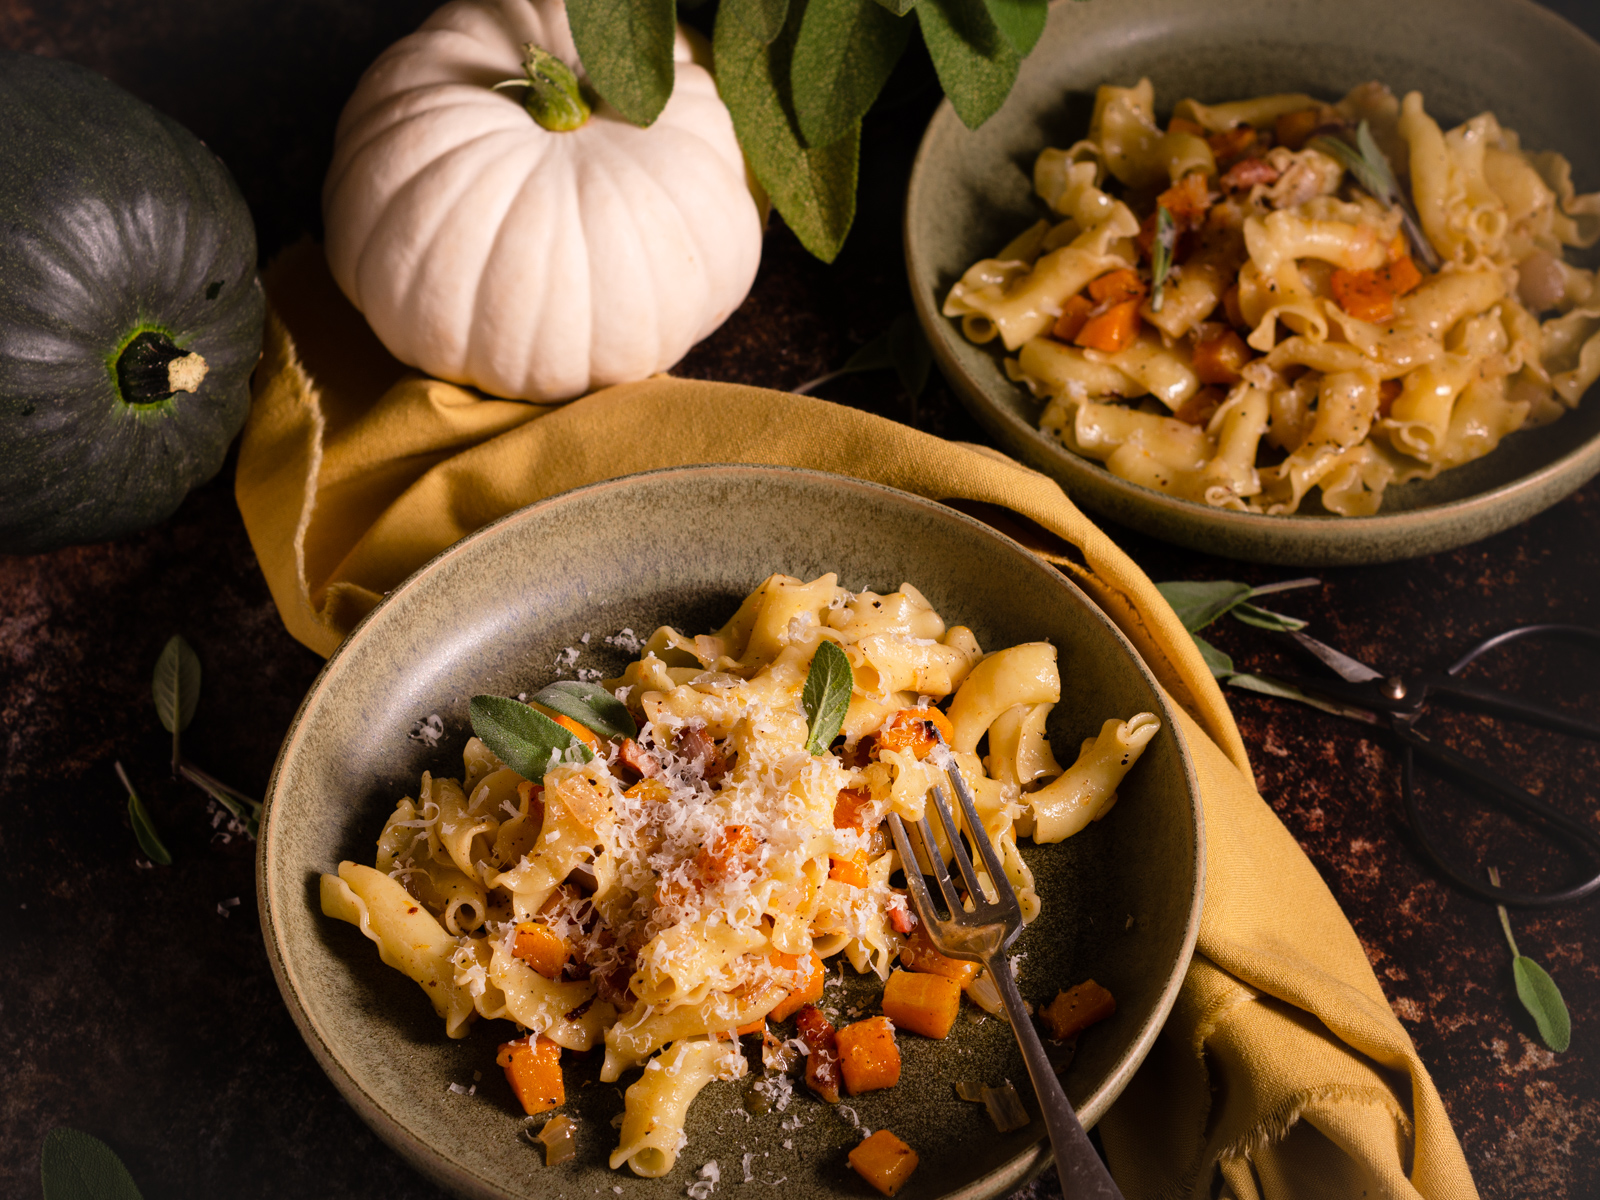 A lovely warming bowl of pasta with a browned butter, pumpkin and bacon sauce.